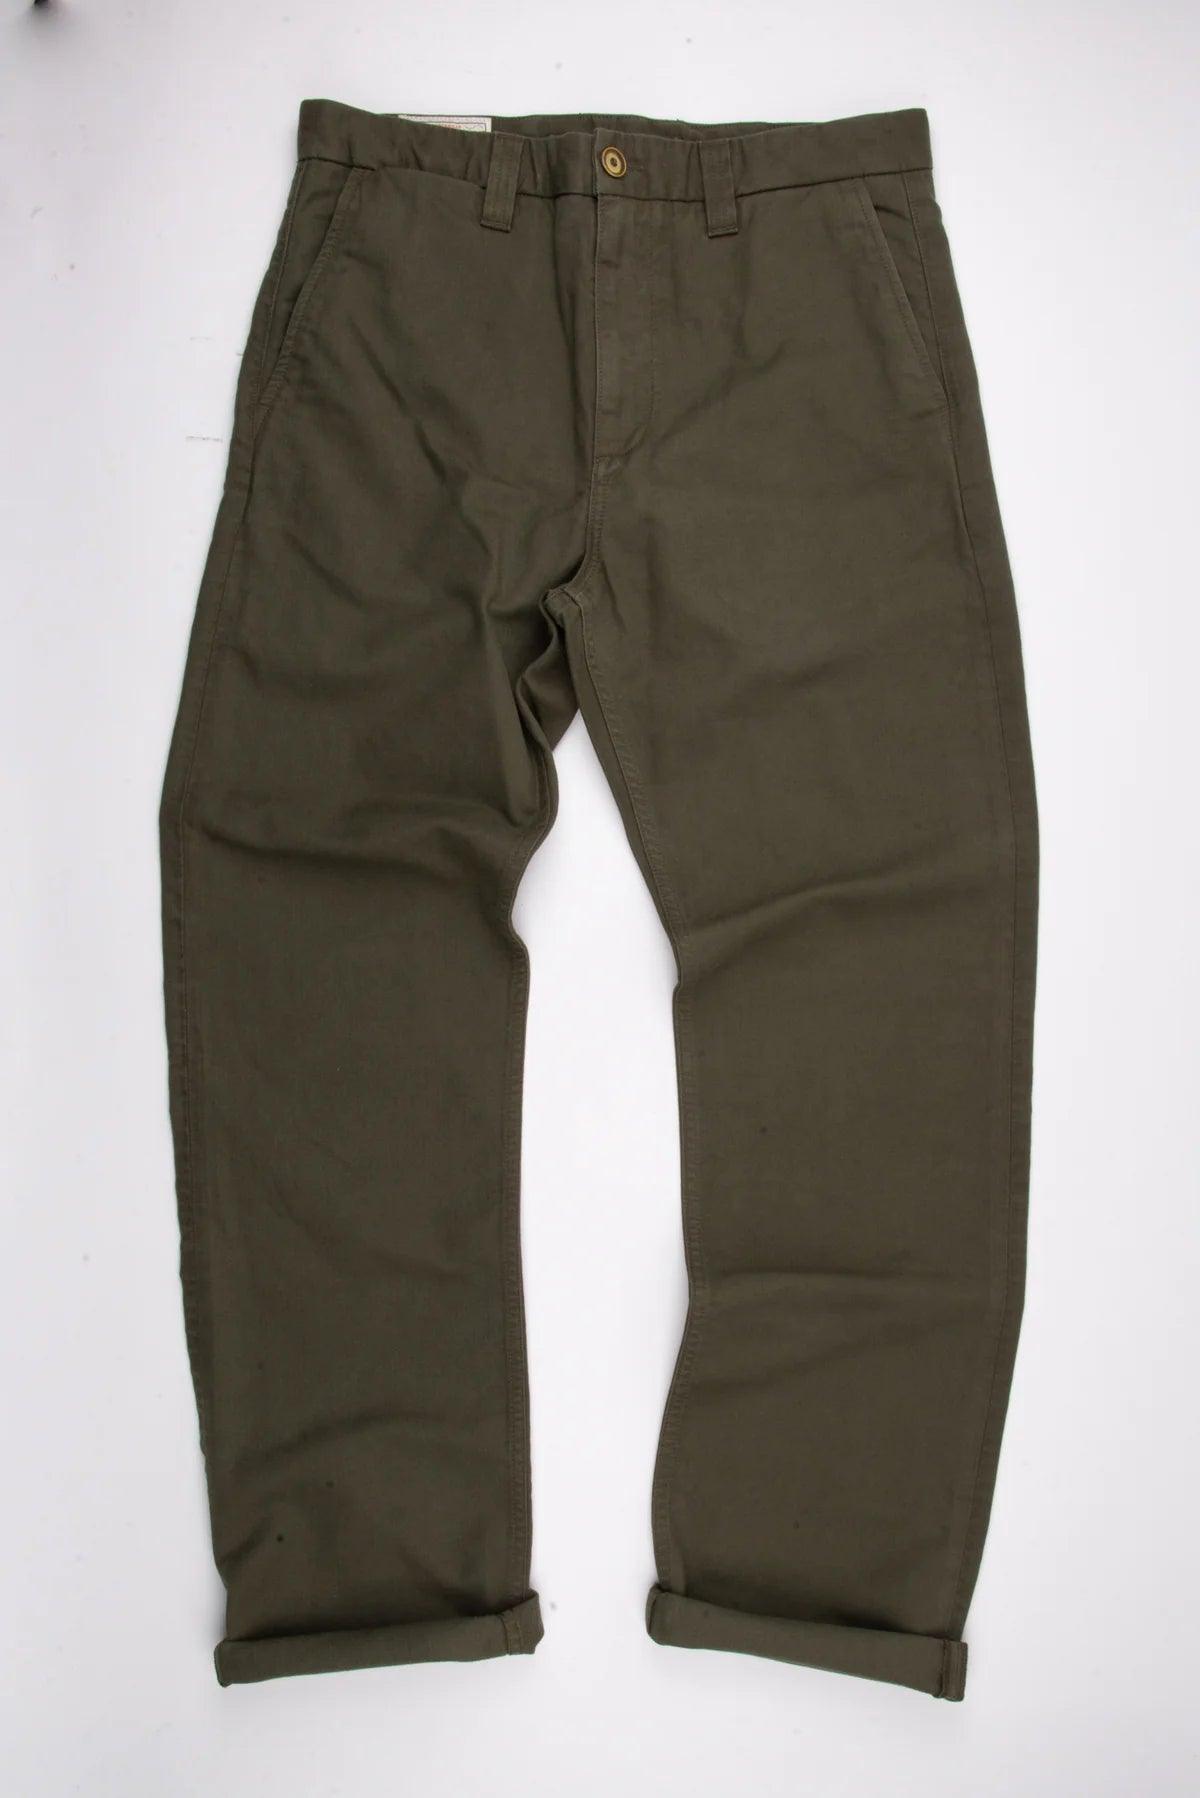 Freenote Cloth Deck Pant Straight Fit - Olive - Guilty Party